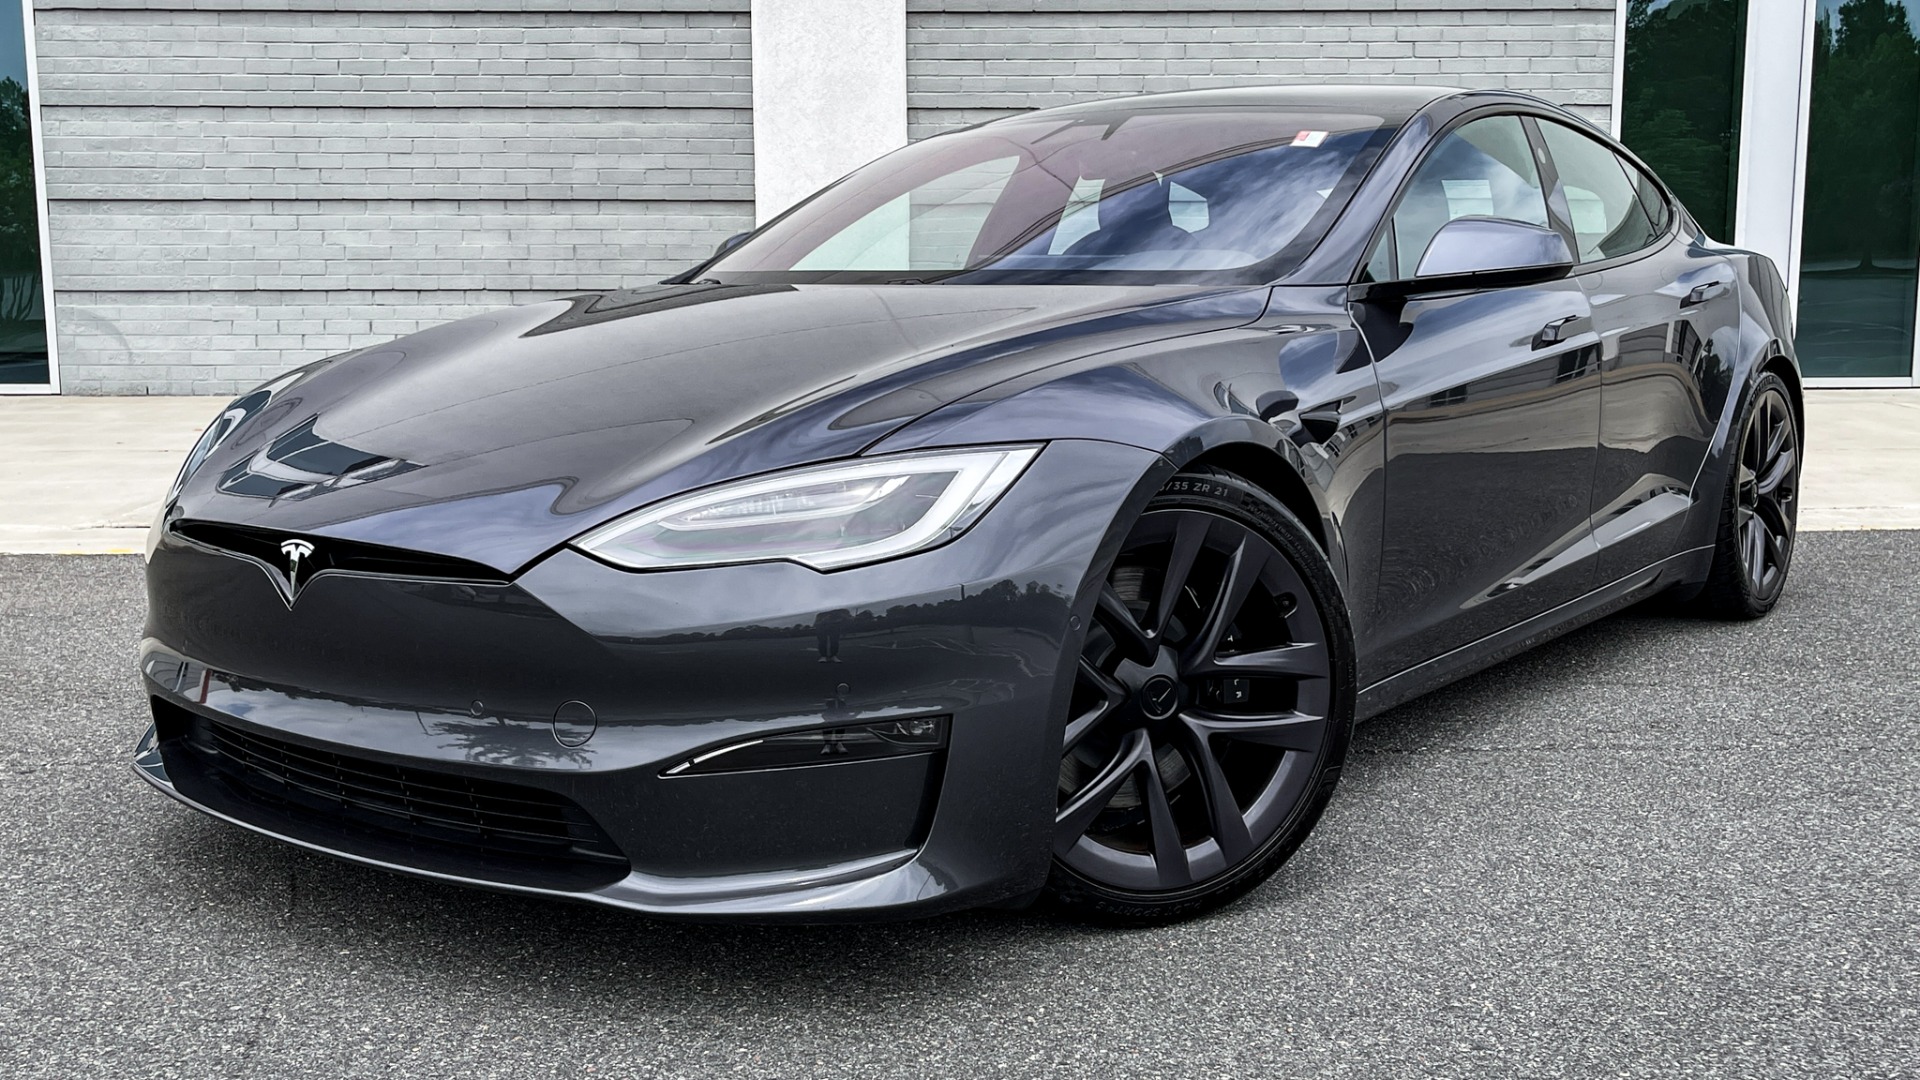 Used 2021 Tesla Model S Plaid / FULL SELF DRIVING / 21IN WHEELS / CARBON FIBER TRIM / PREMIUM CONNE for sale $105,000 at Formula Imports in Charlotte NC 28227 1